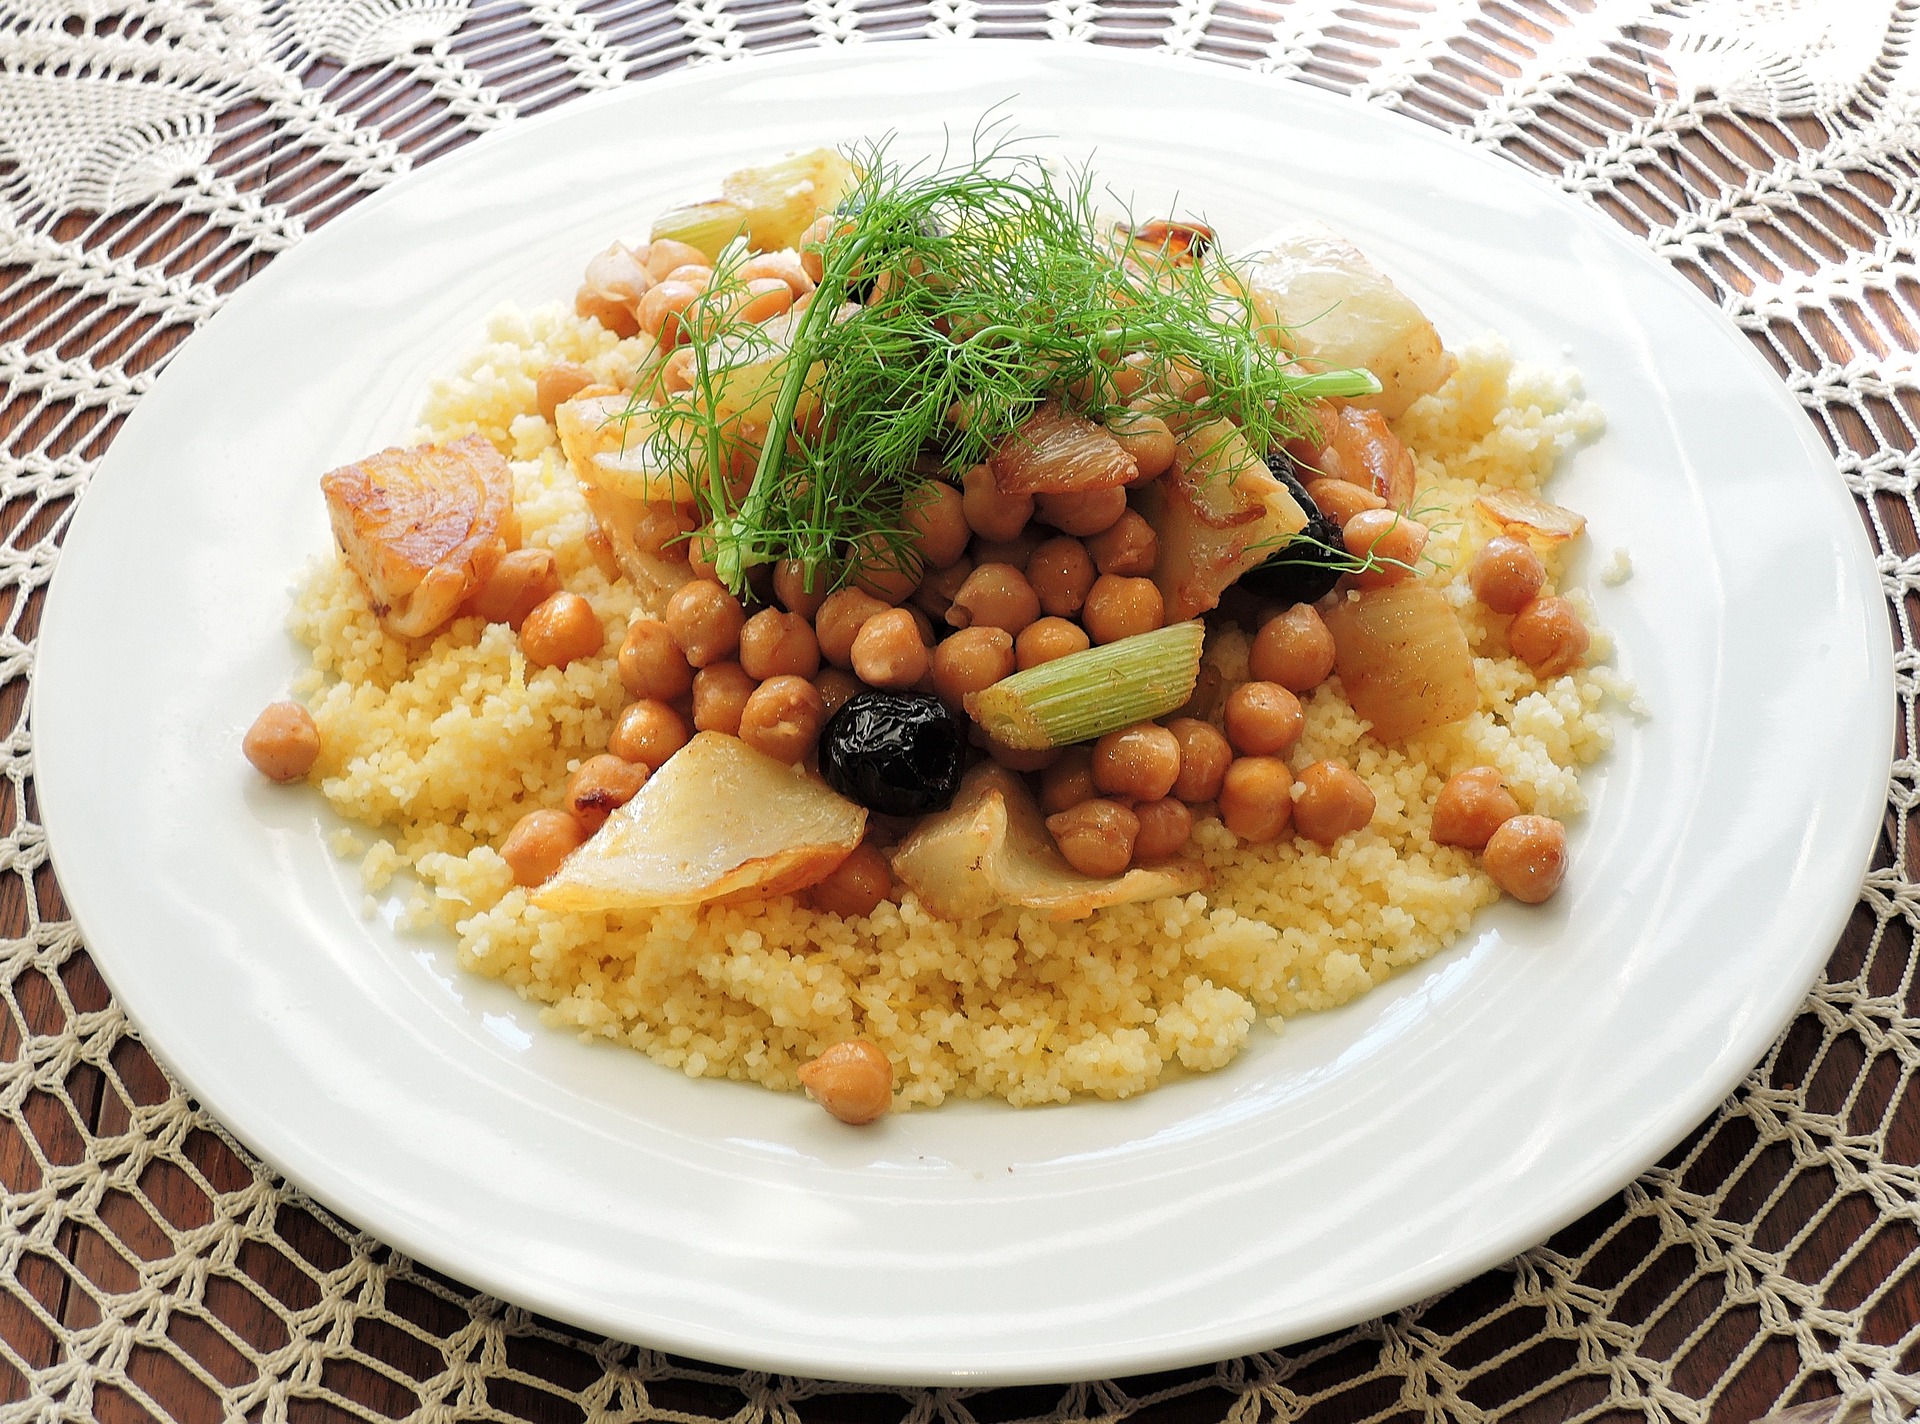 Couscous with chickpeas